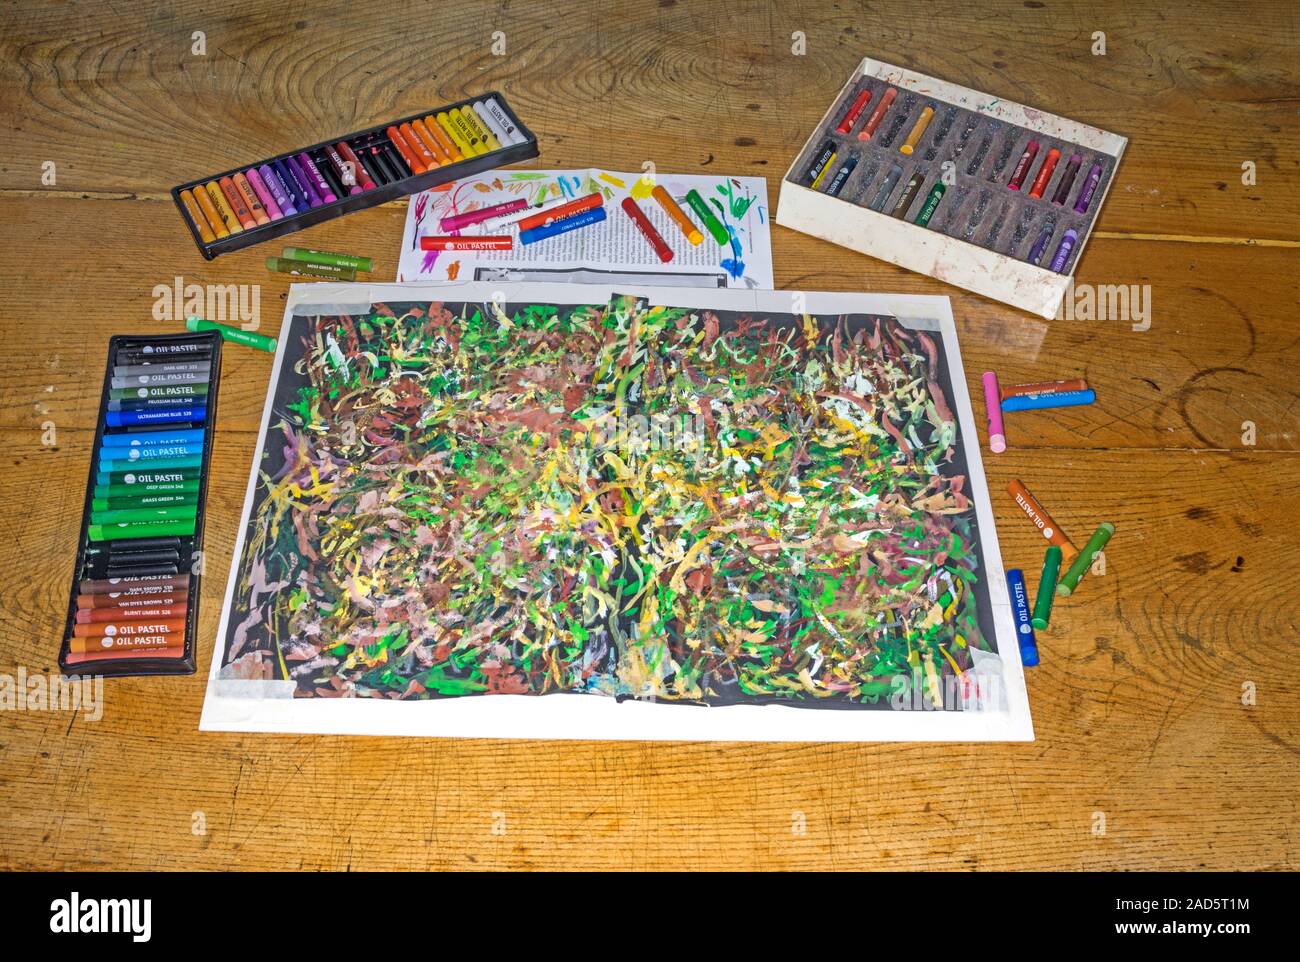 Oil pastels used to create an artwork Stock Photo